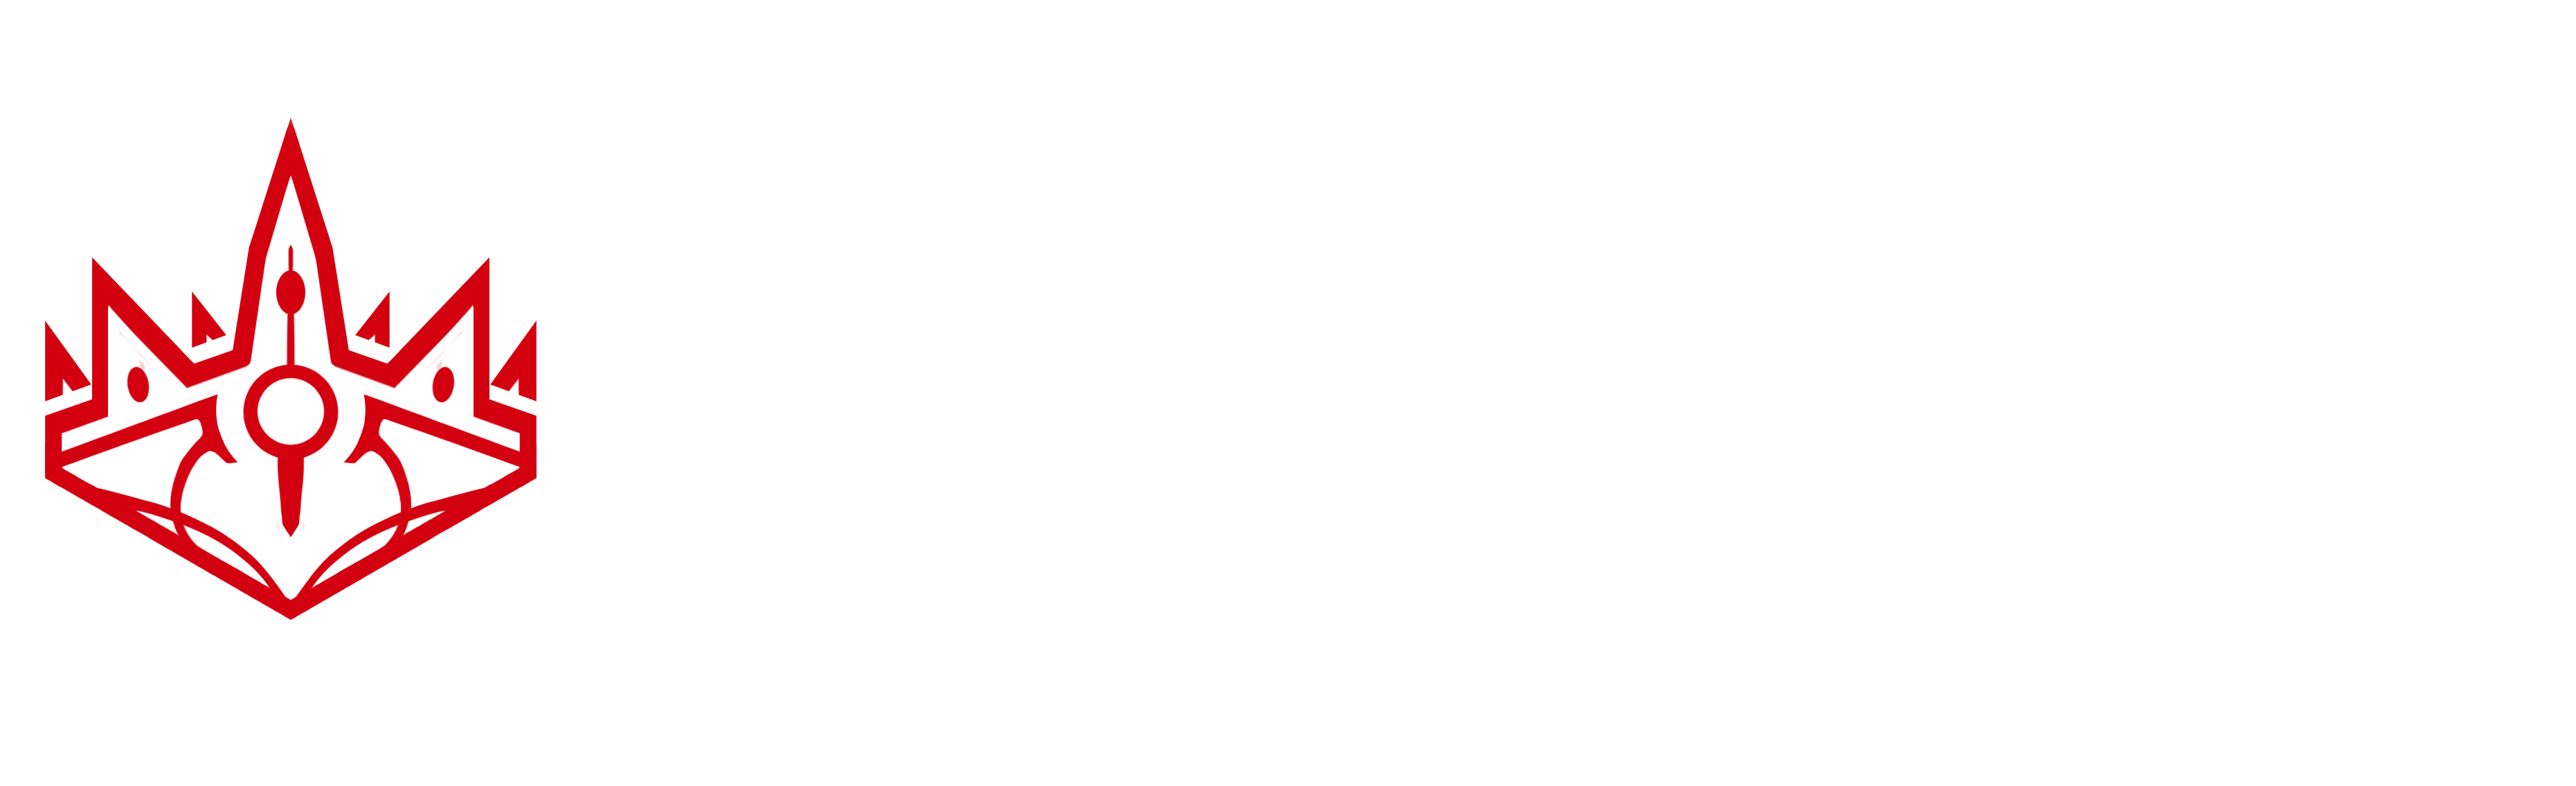 New Content - Endless Legend (4045x1470), Png Download